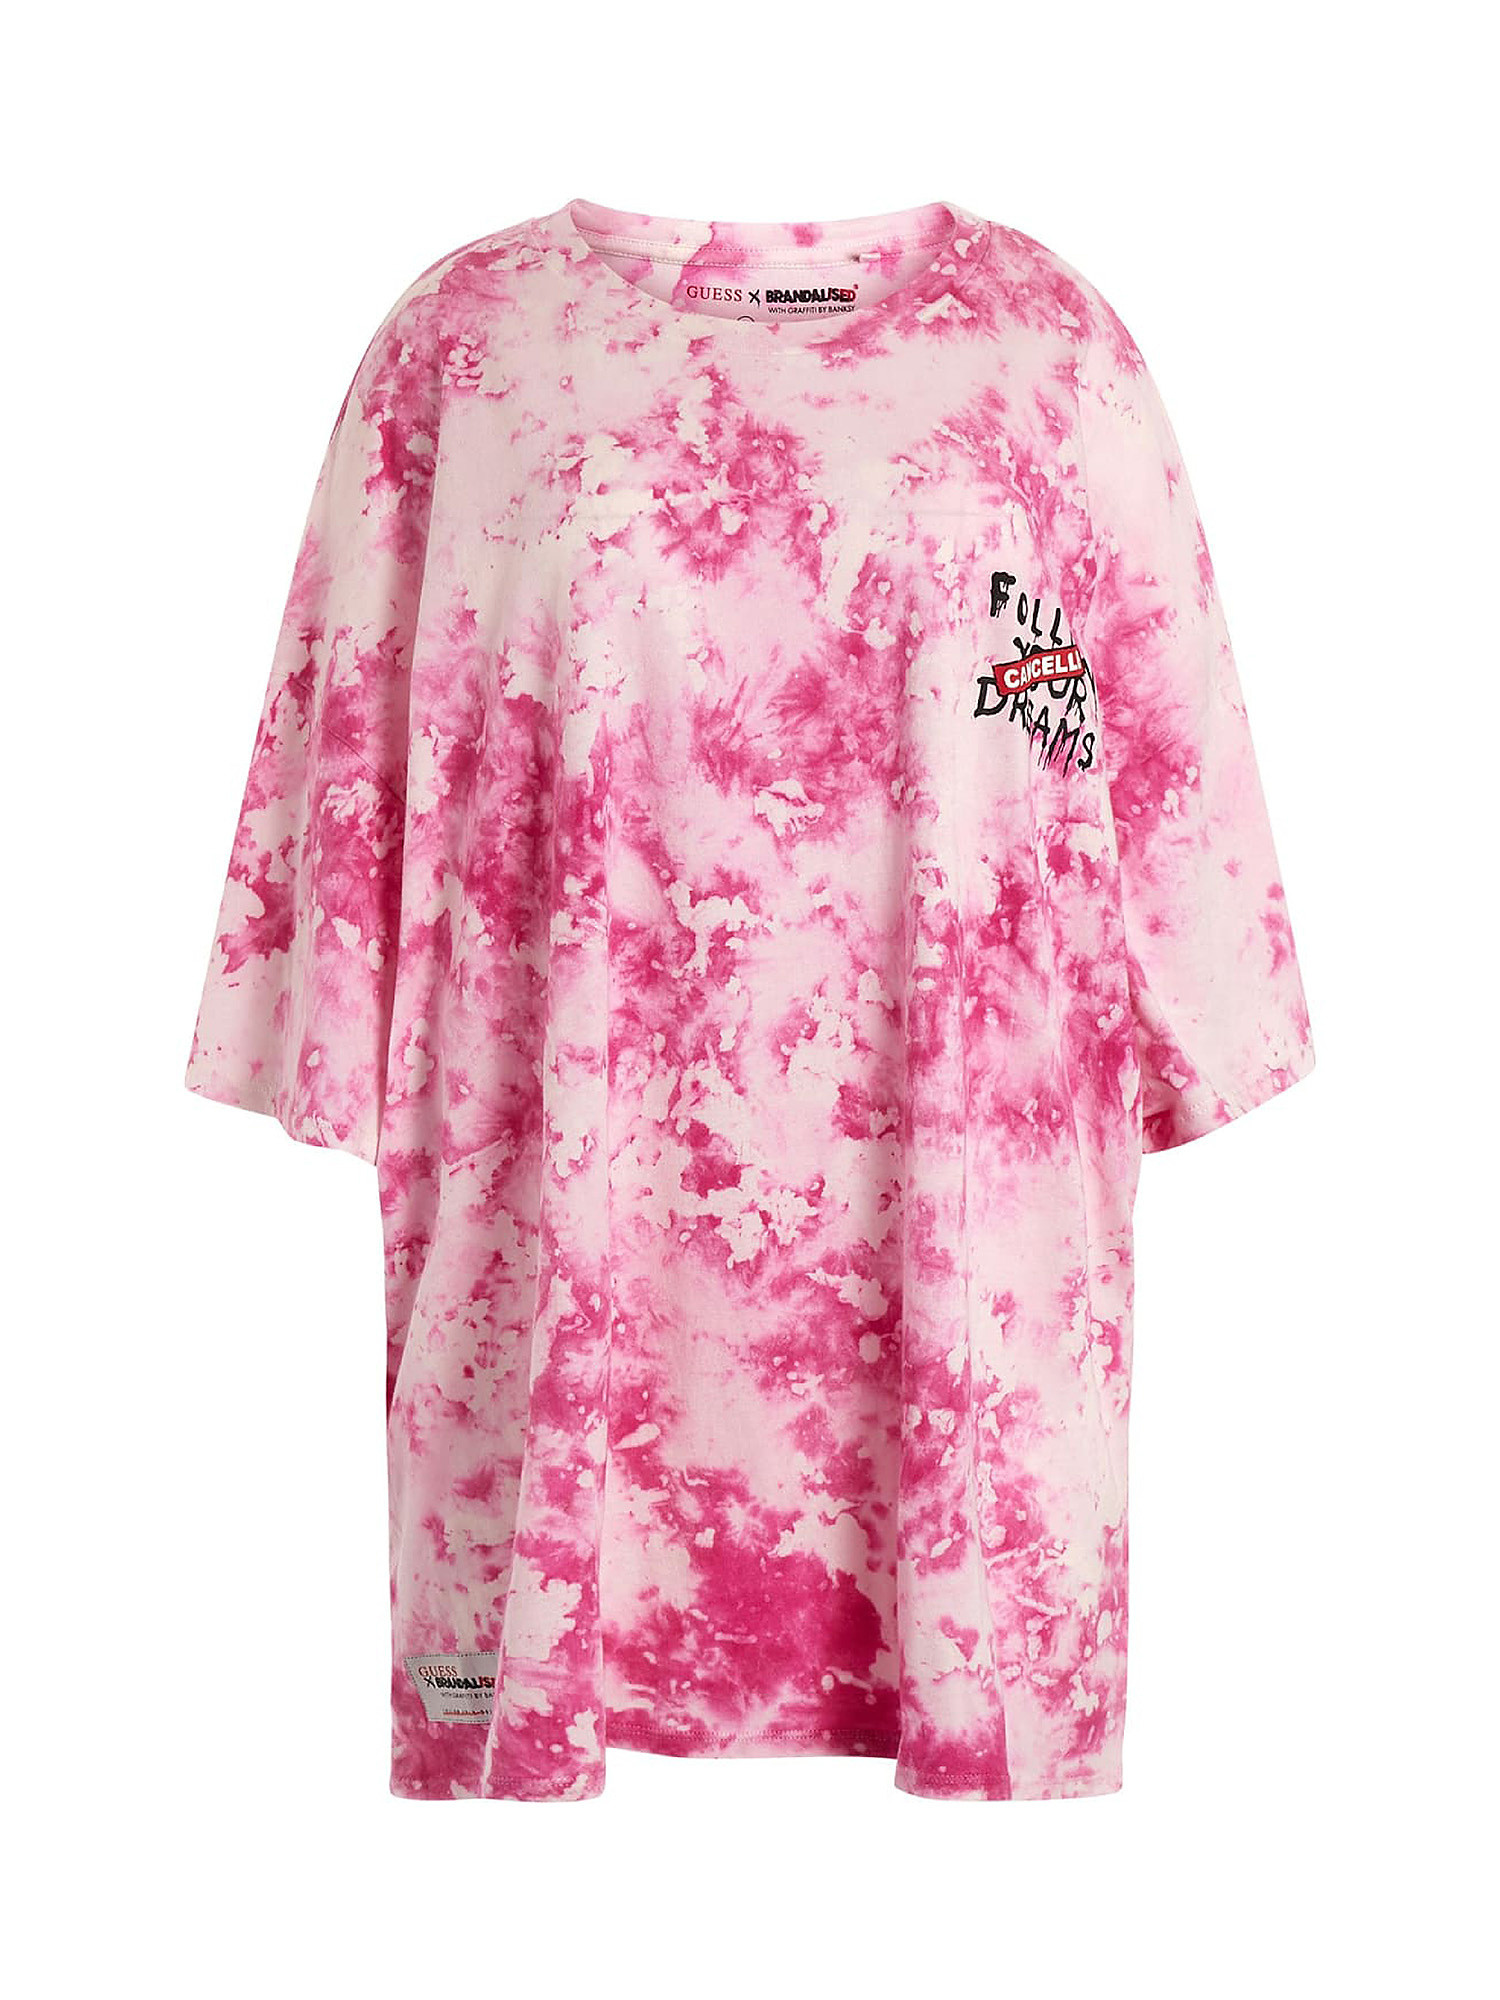 GUESS - T-shirt tie-dye, Rosa, large image number 1